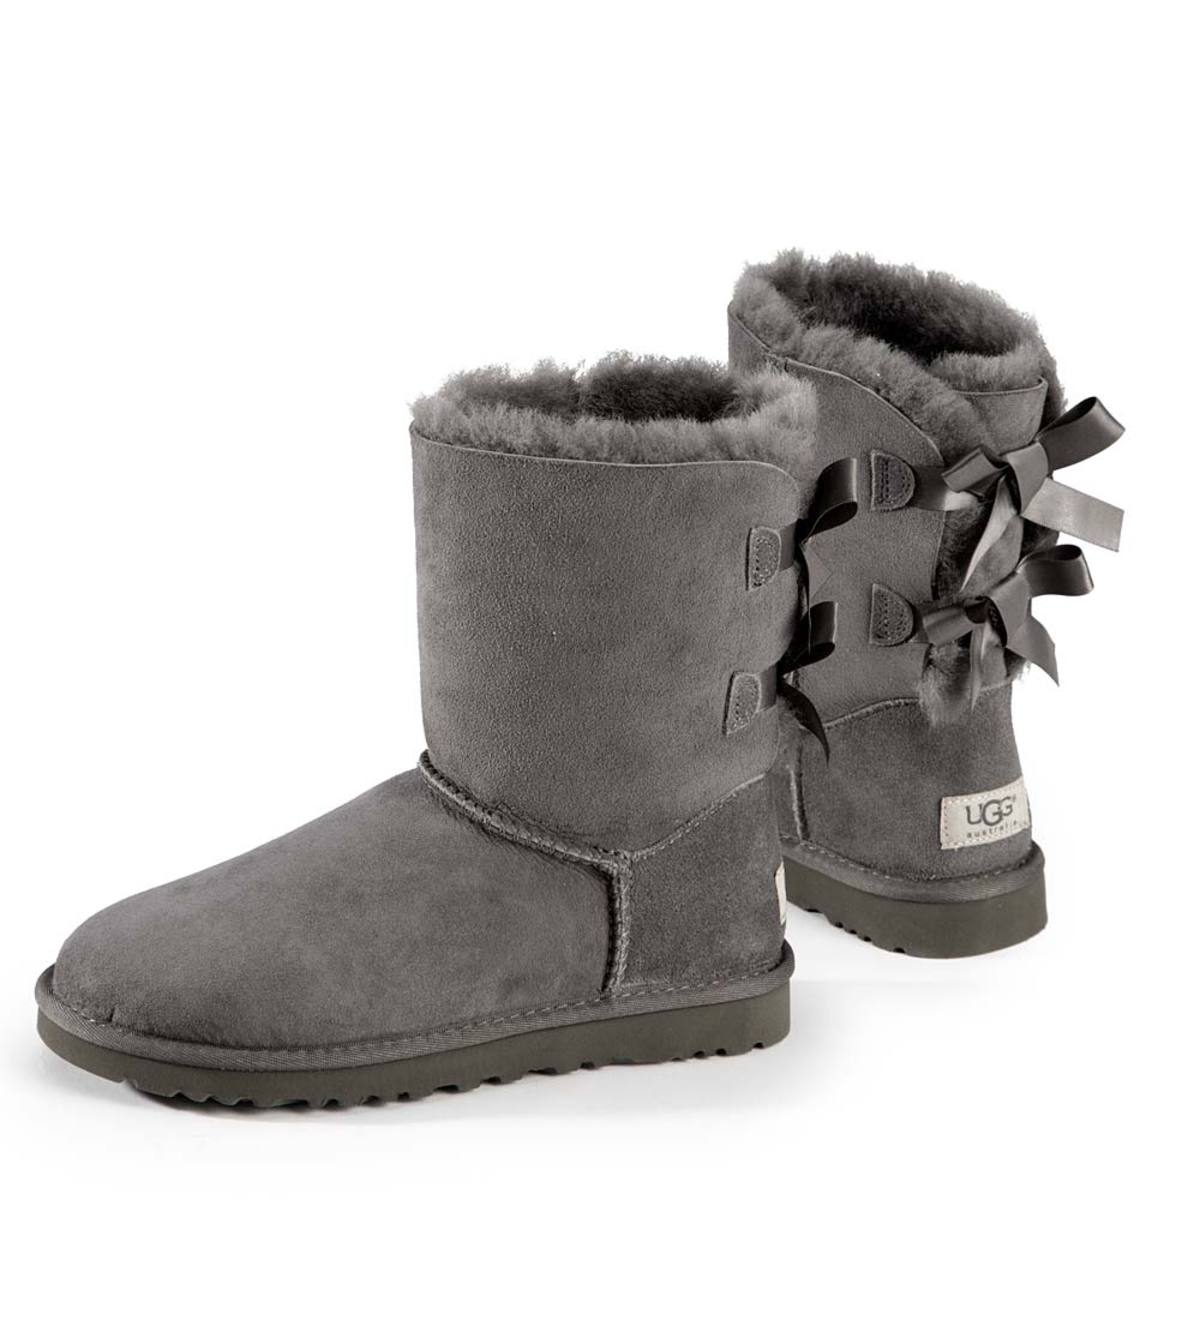 grey ugg boots with bows